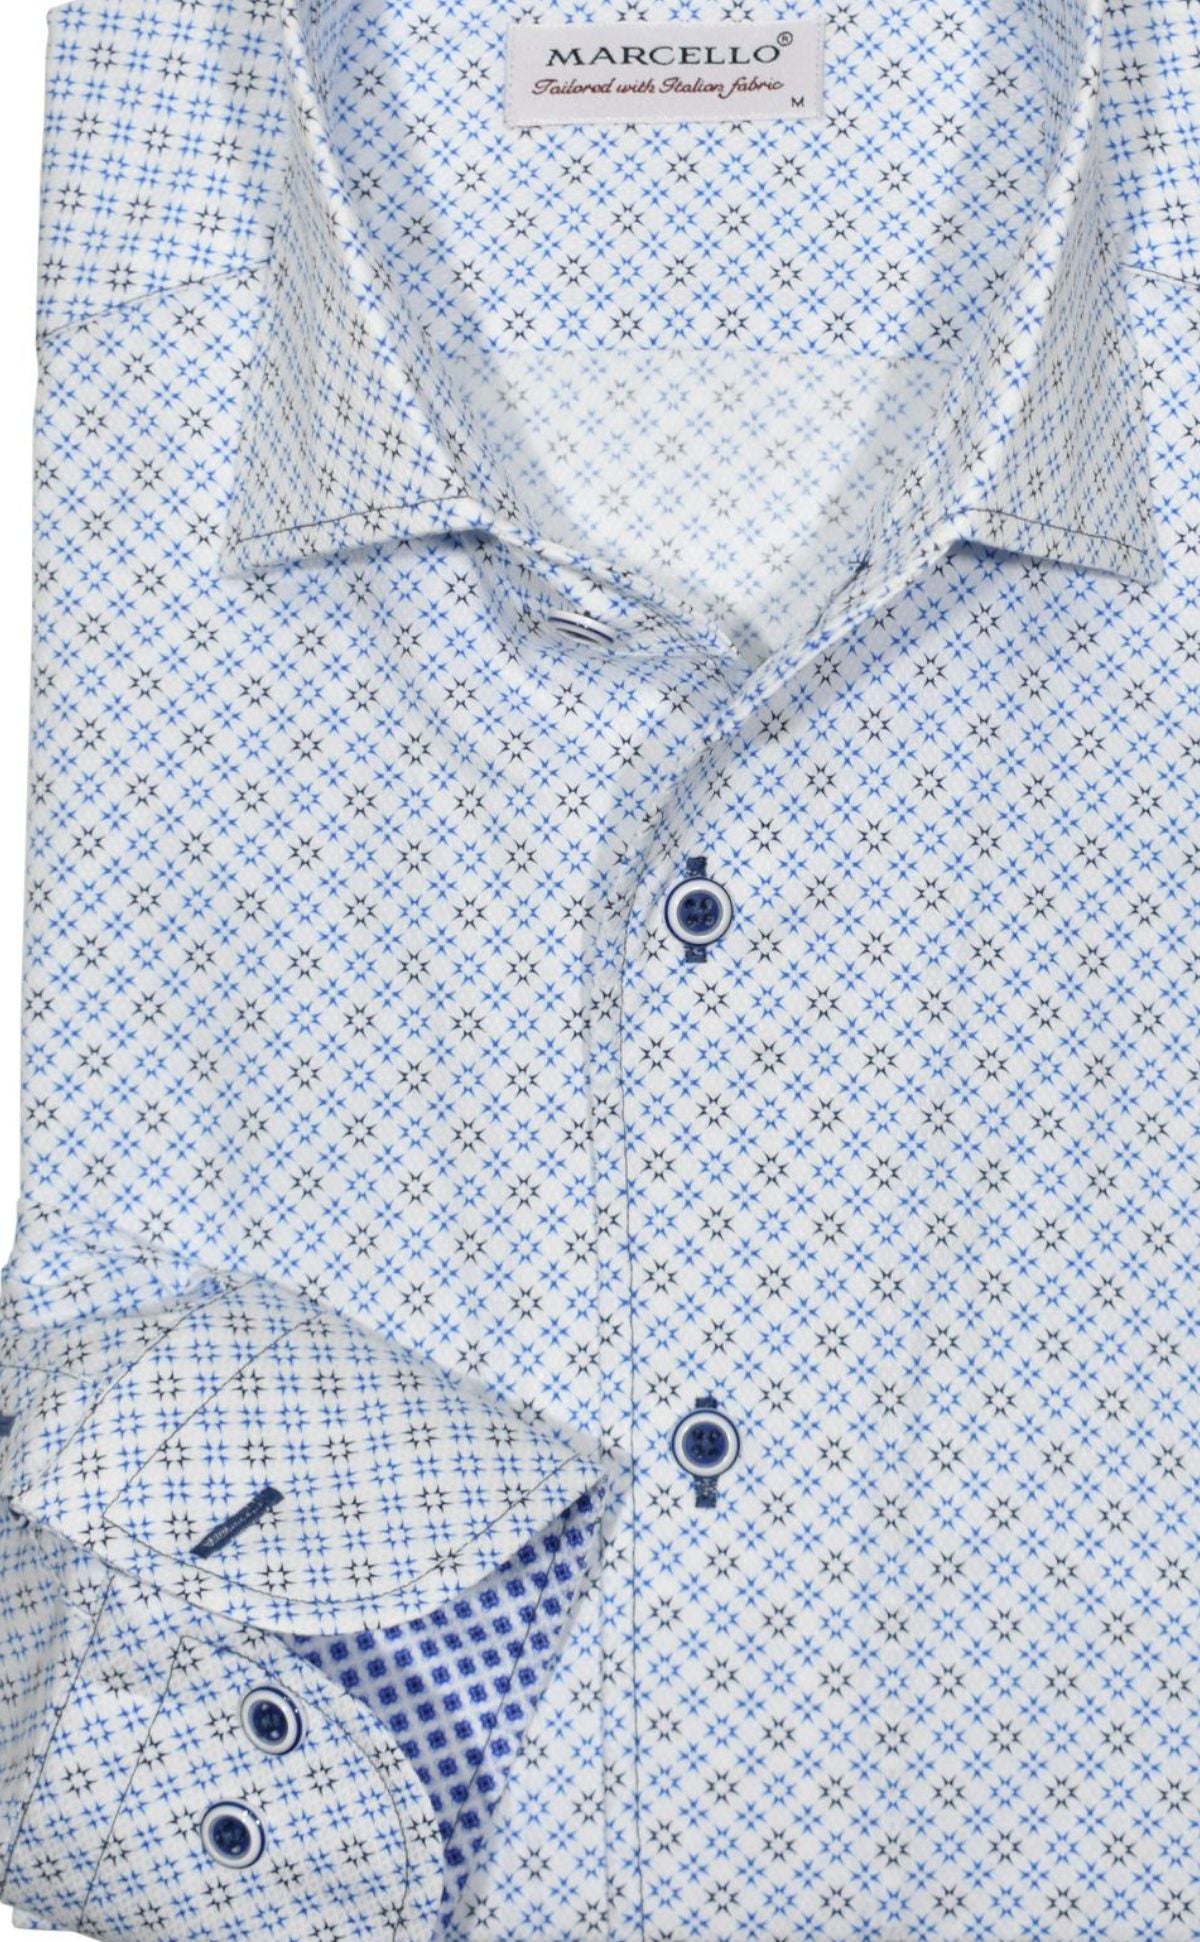 The Marcello exclusive design is like no other, creating a dignified look with a collar that stands perfectly whether worn alone or under a sport coat. Its unique placket ensures a smooth, crisp appearance.  Luxurious cotton fabric. Open medallion pattern on a textured fabric ground. Style W856R